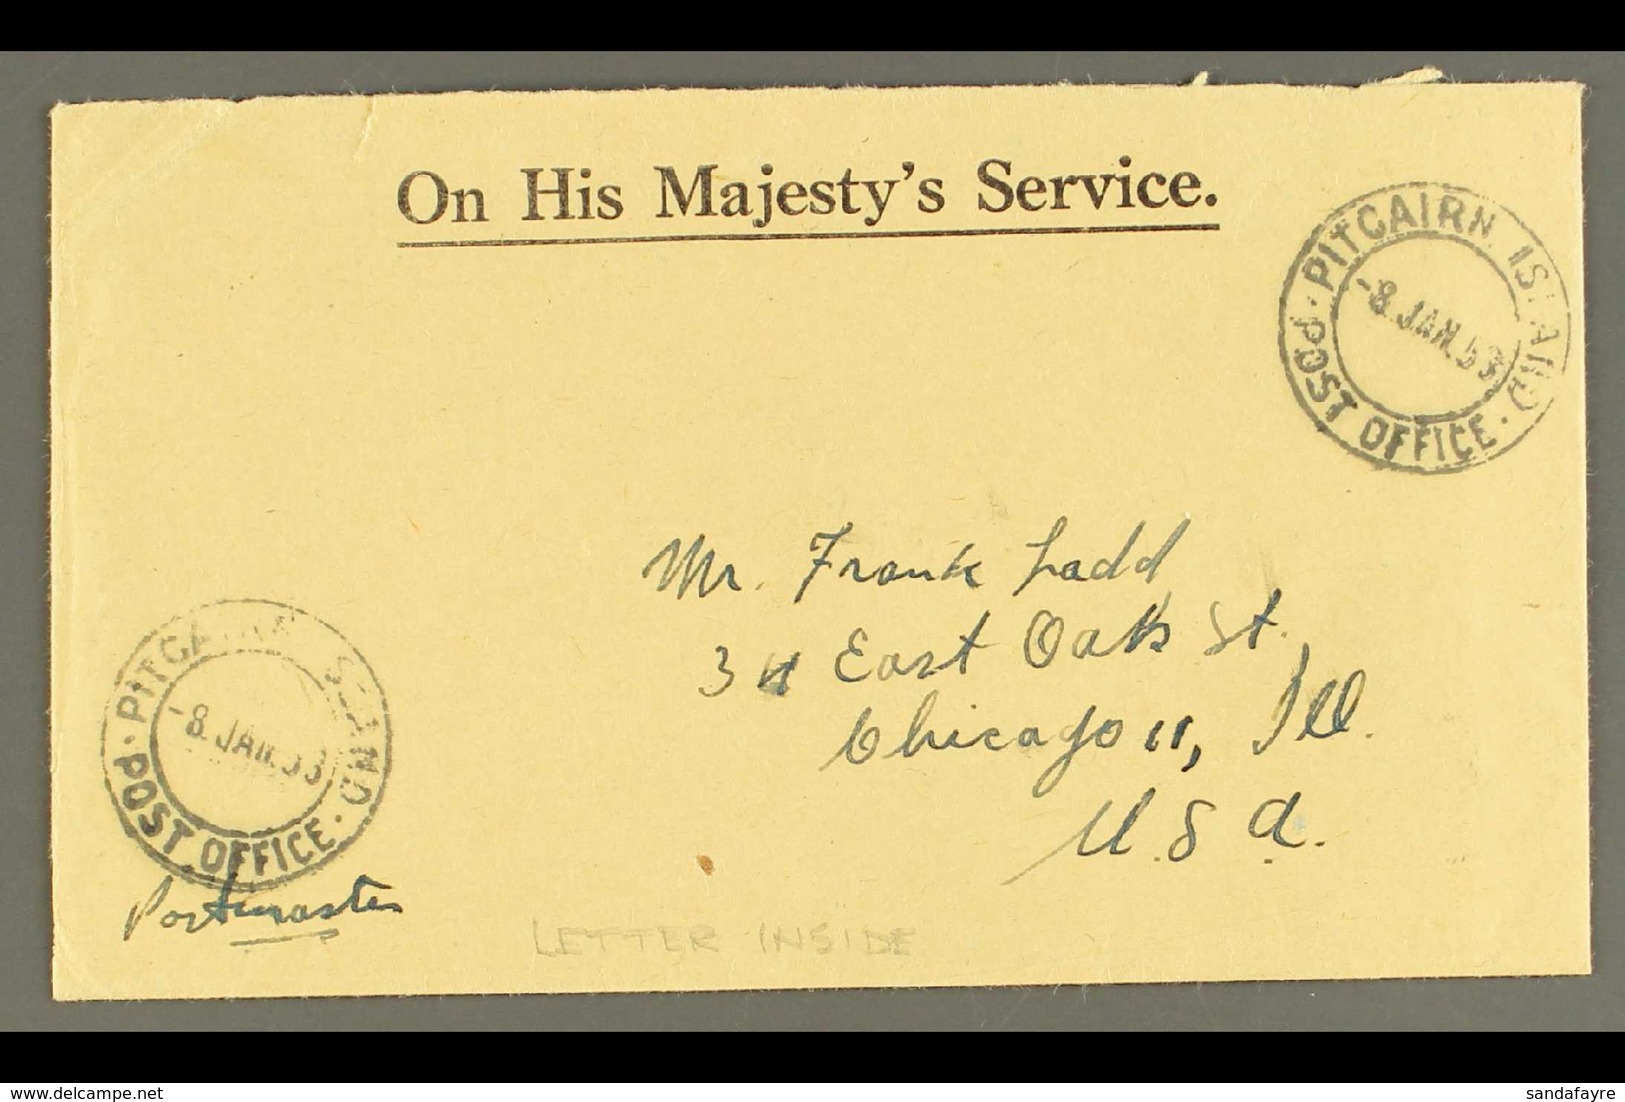 1953 (8 Jan) Stampless Printed 'OHMS' Envelope To Chicago With Two Fine Strikes Of "Pitcairn Island Post Office" Cds, En - Pitcairneilanden